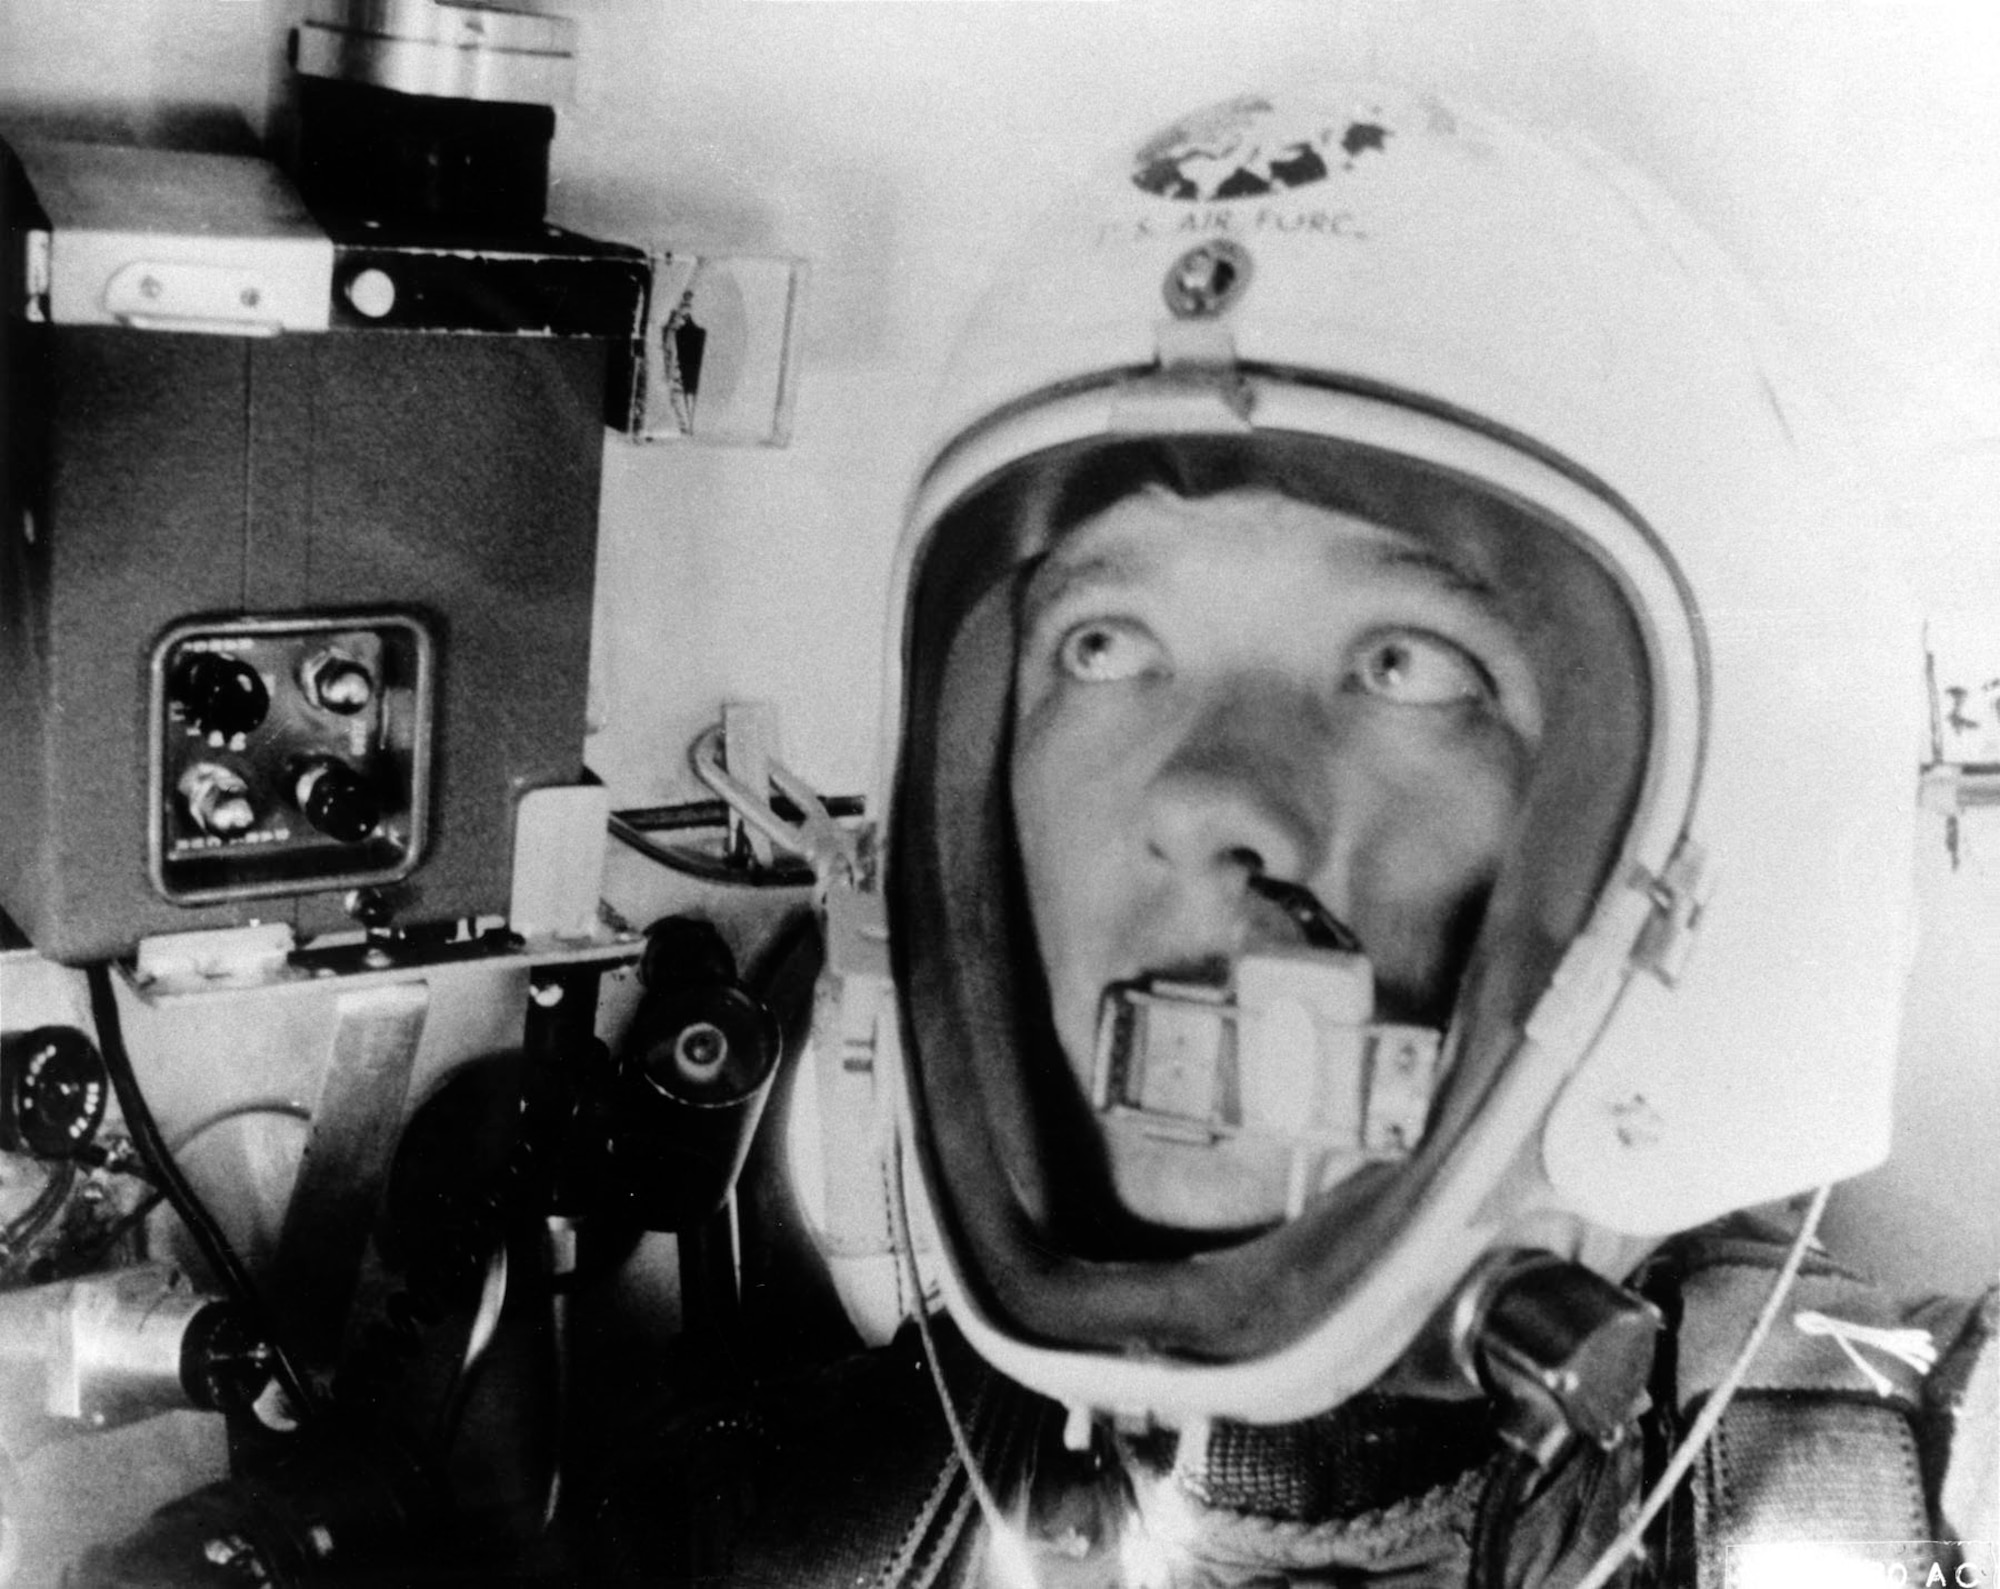 Self-photograph made by Maj. Simons as he approached his record altitude. (U.S. Air Force photo)